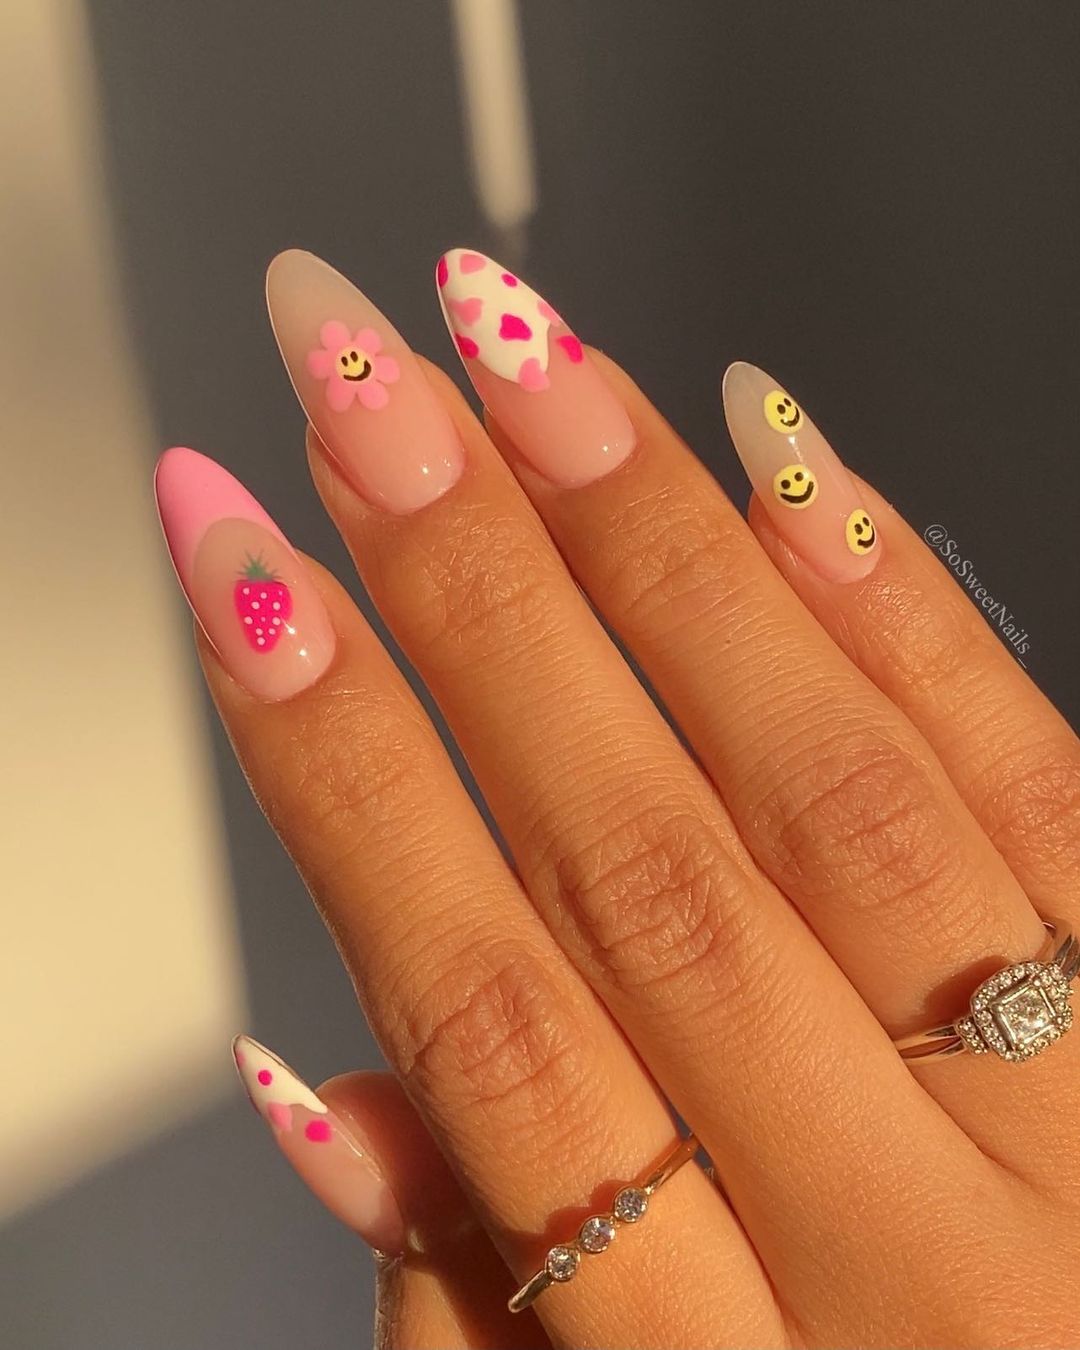 Inspiring Yellow Nail Designs for Hands and Toes Worth Exploring